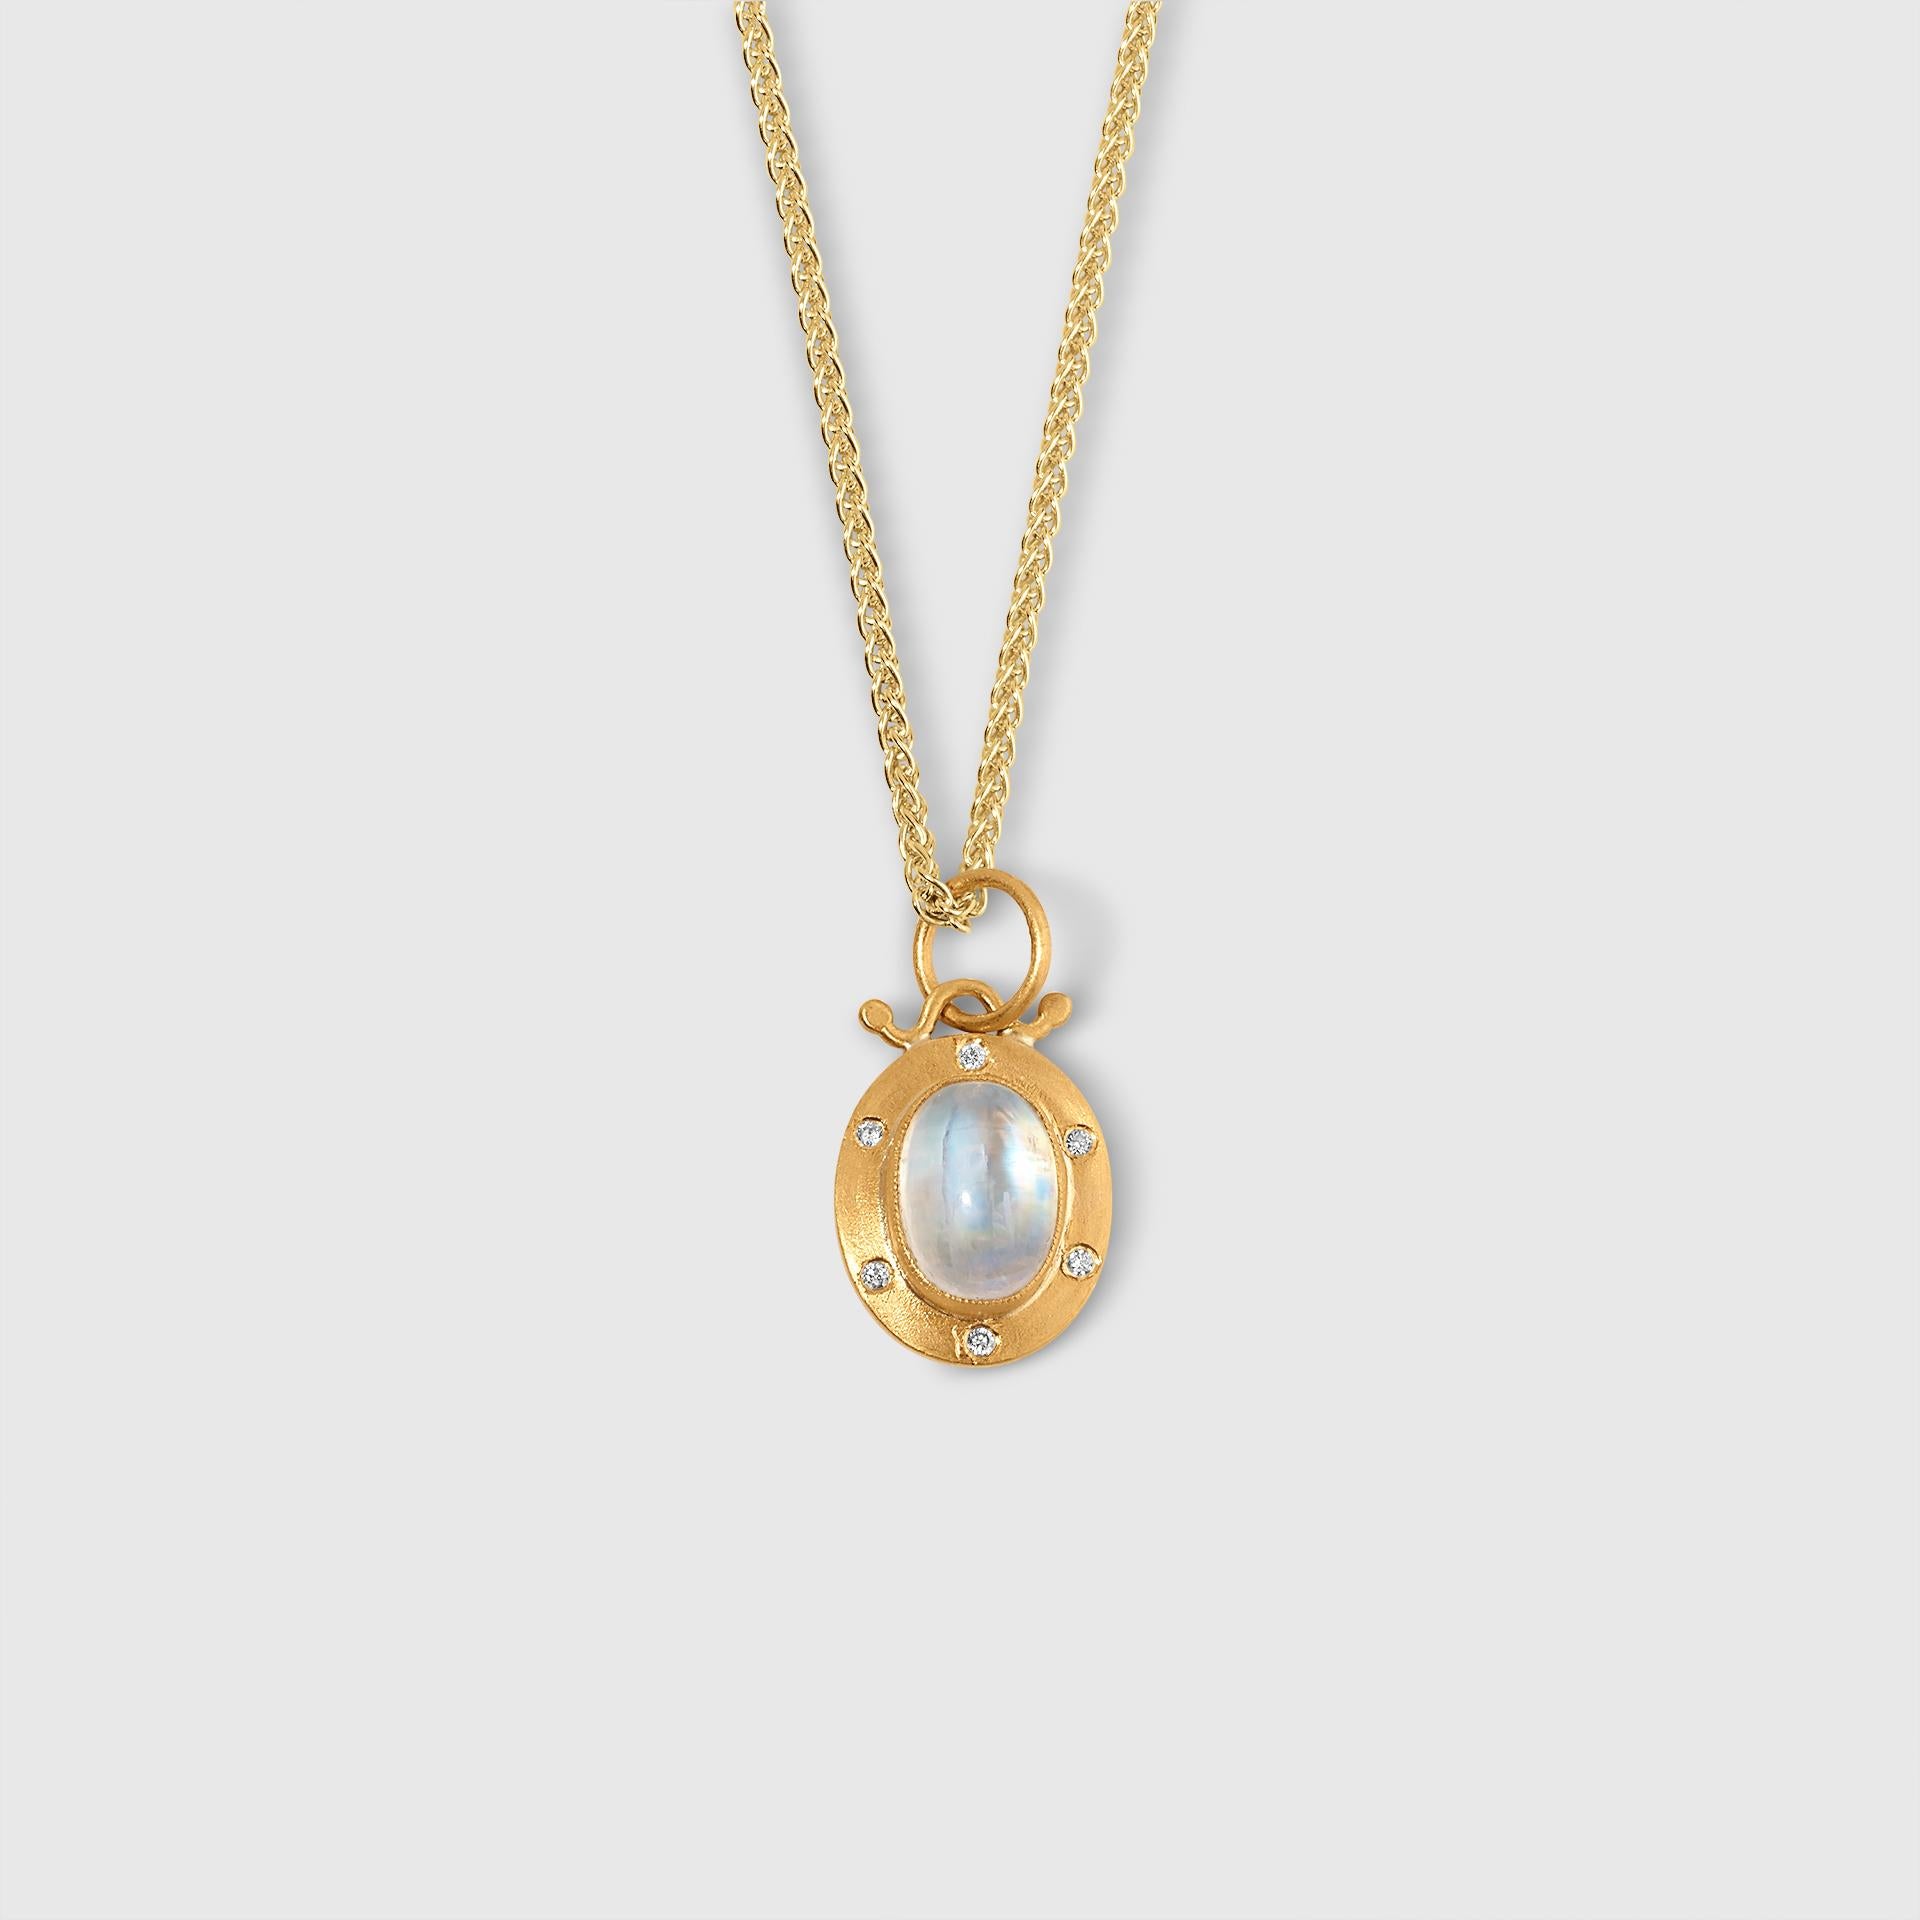 Cabochon 2.60ct Oval Moonstone Charm Pendant Necklace with Diamonds, 24kt Gold and Silver For Sale